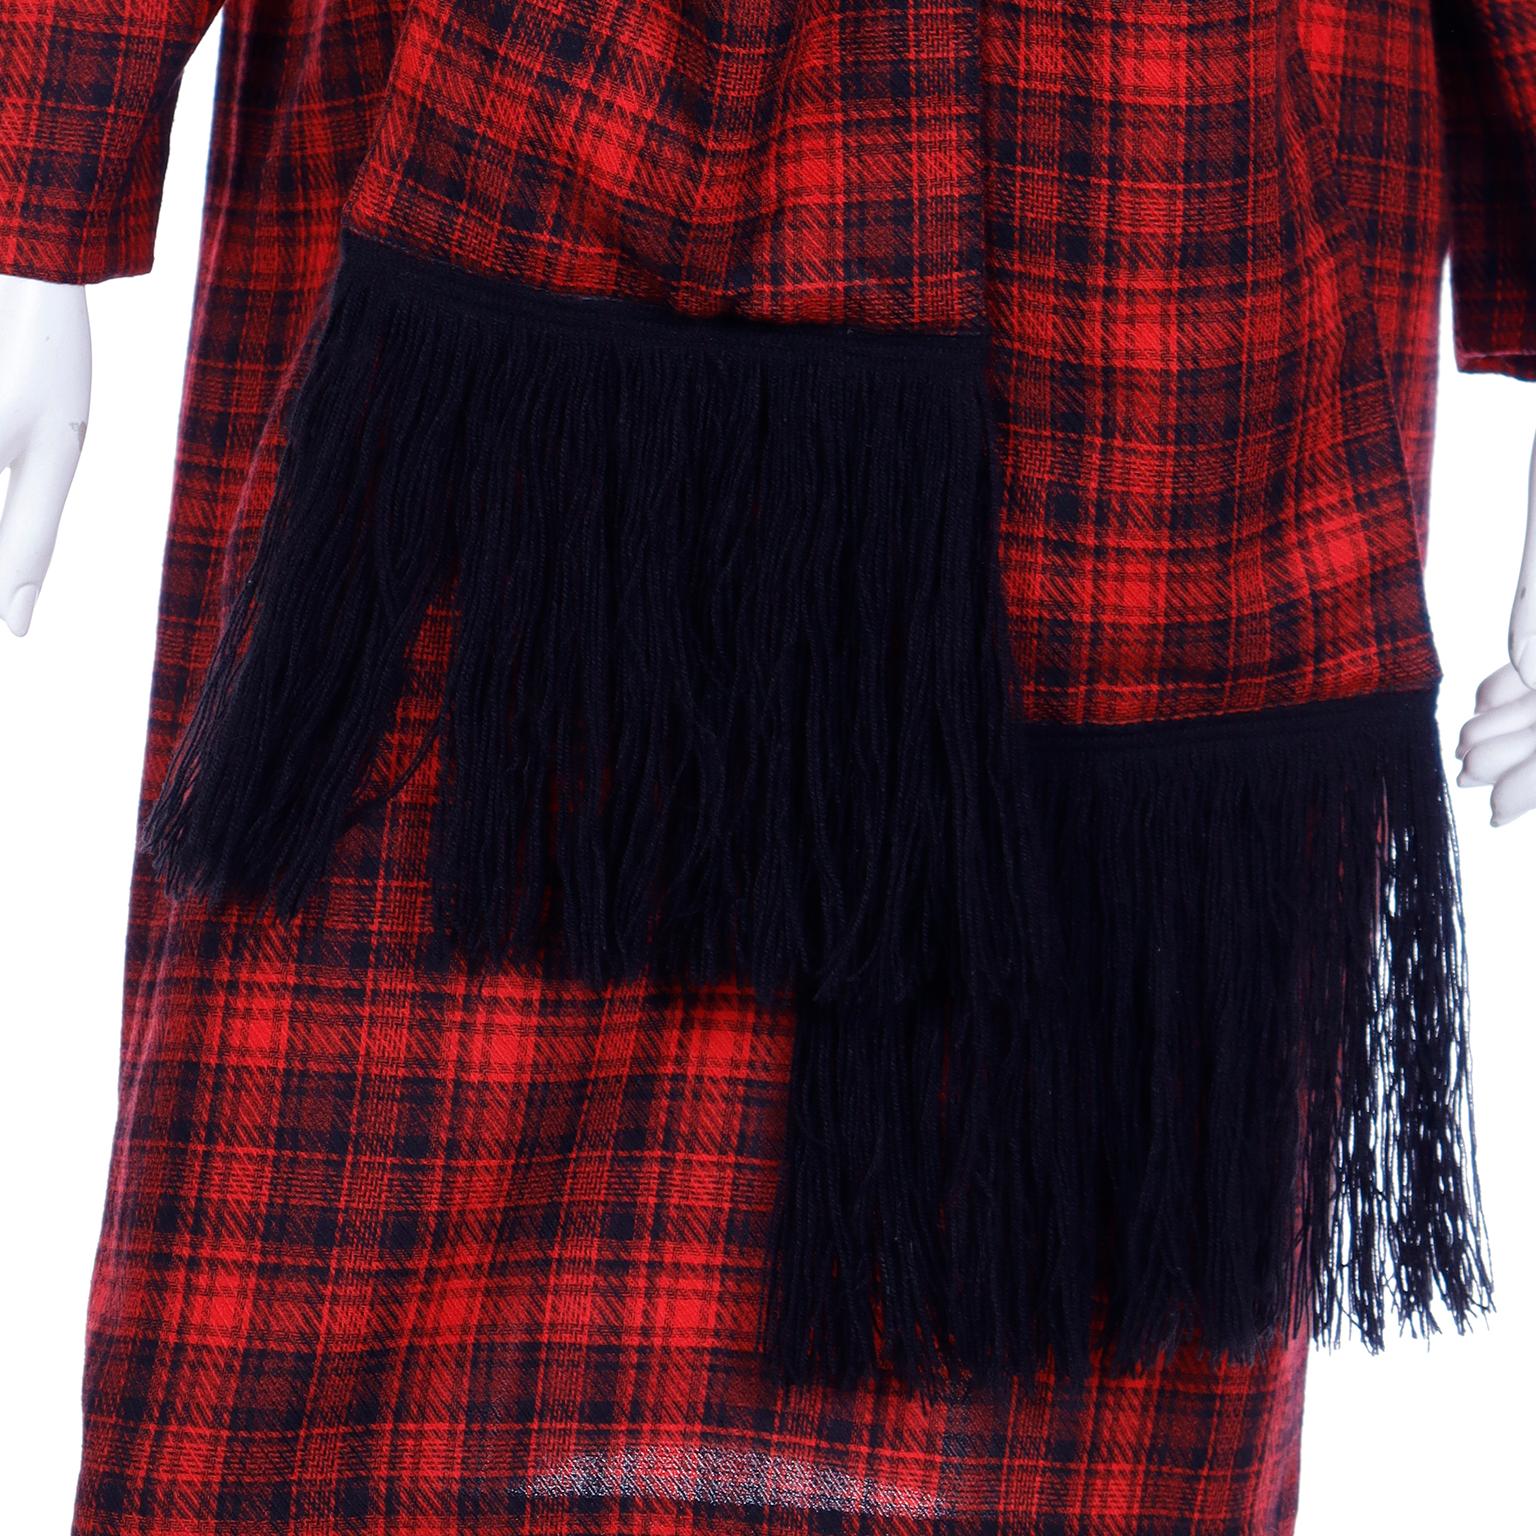 Pierre Cardin Vintage Red Plaid Dress With Long Scarf w Fringe & Pockets For Sale 7